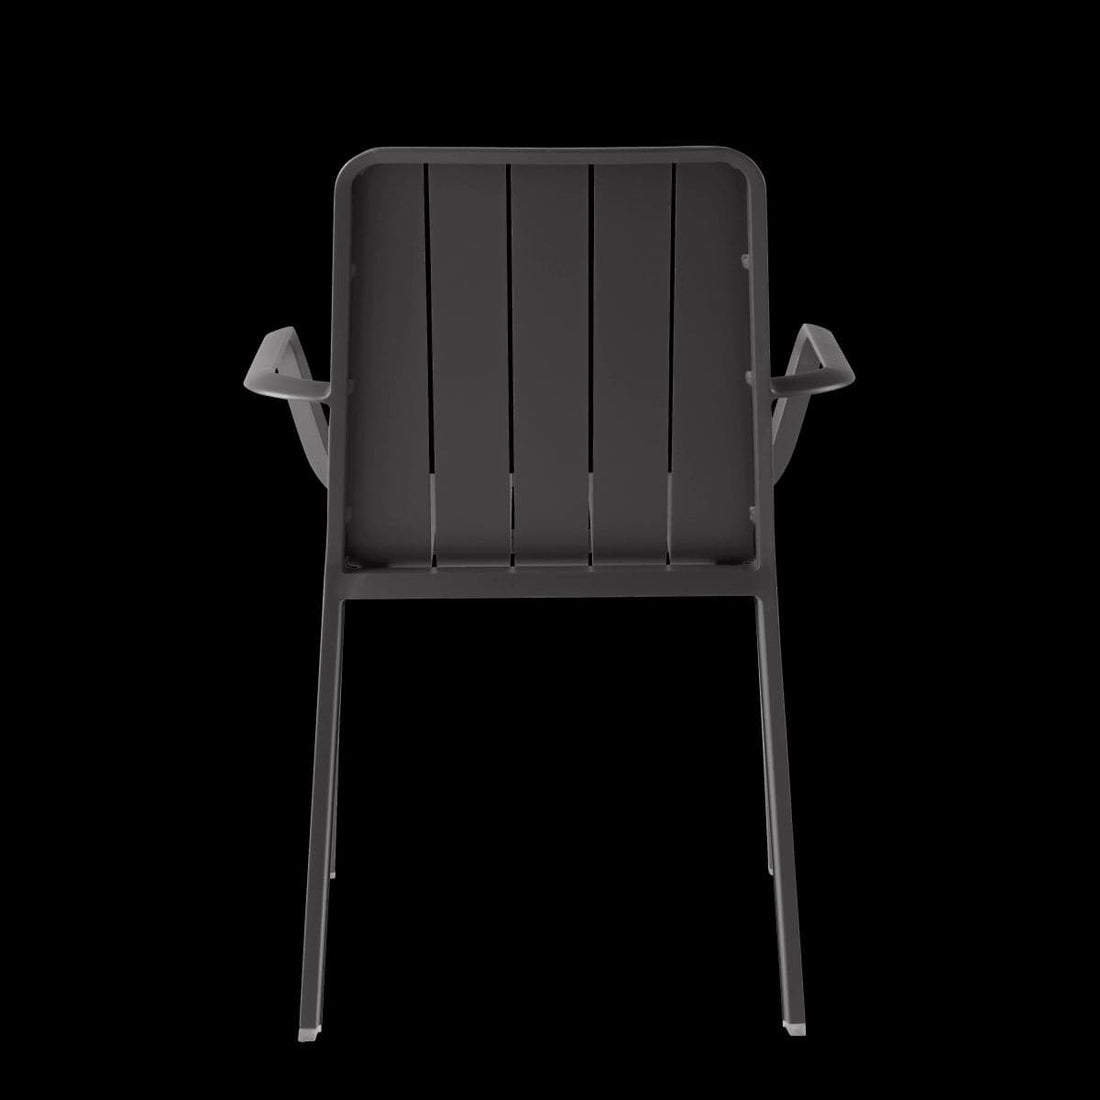 IDAHO NATERIAL ANTHRACITE ALUMINIUM ARMCHAIR WITH ARMRESTS - best price from Maltashopper.com BR500015315